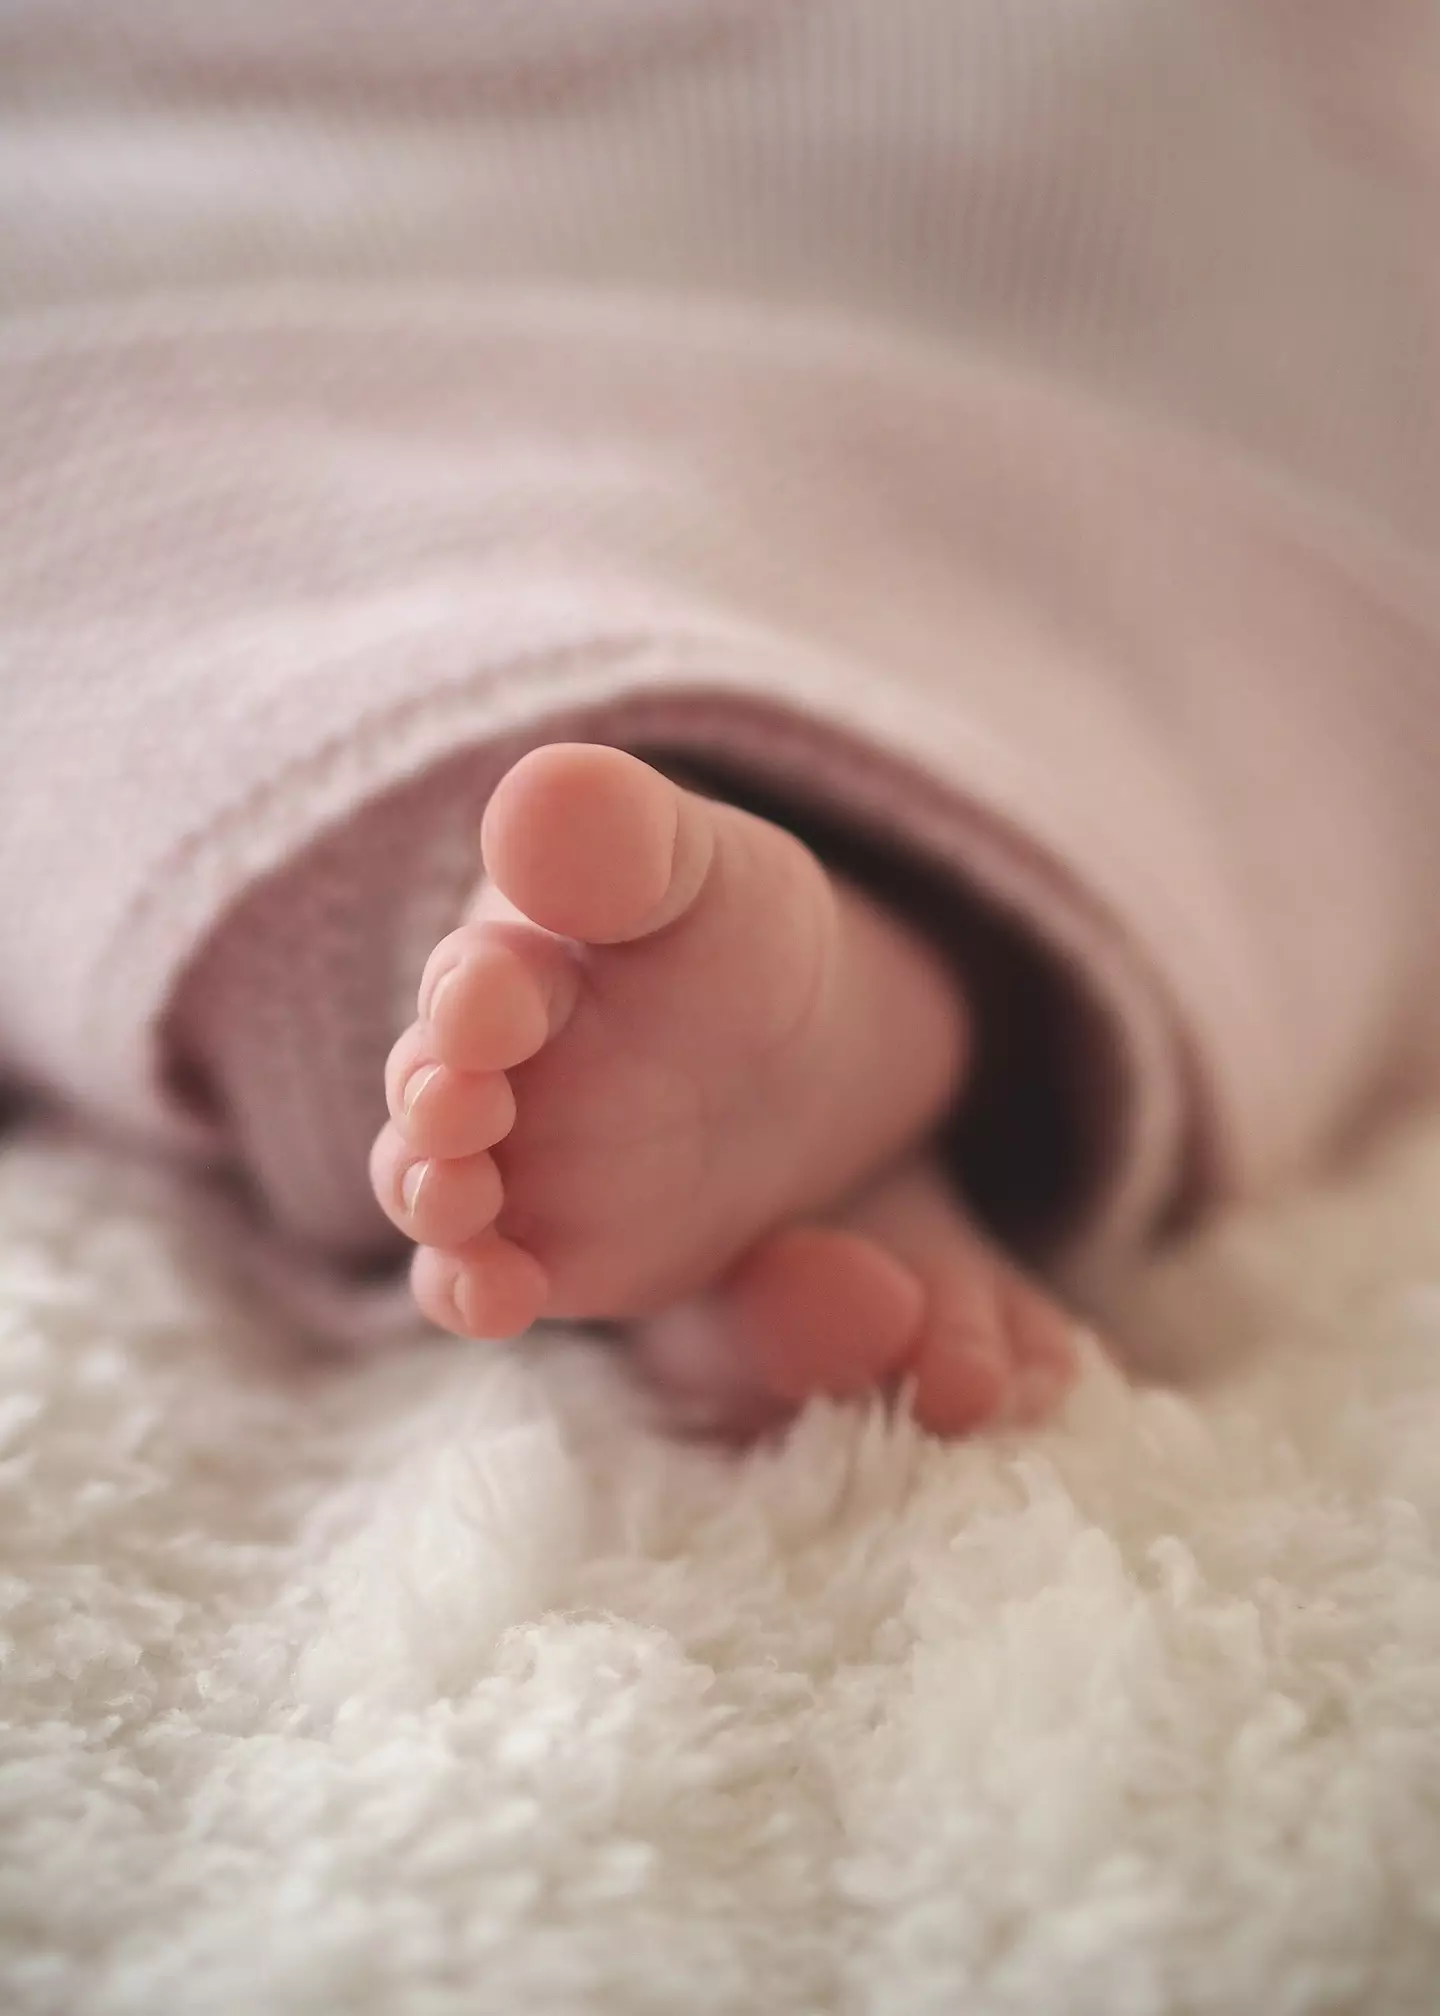 The distraught mum found her baby unresponsive on the floor of her bedroom.